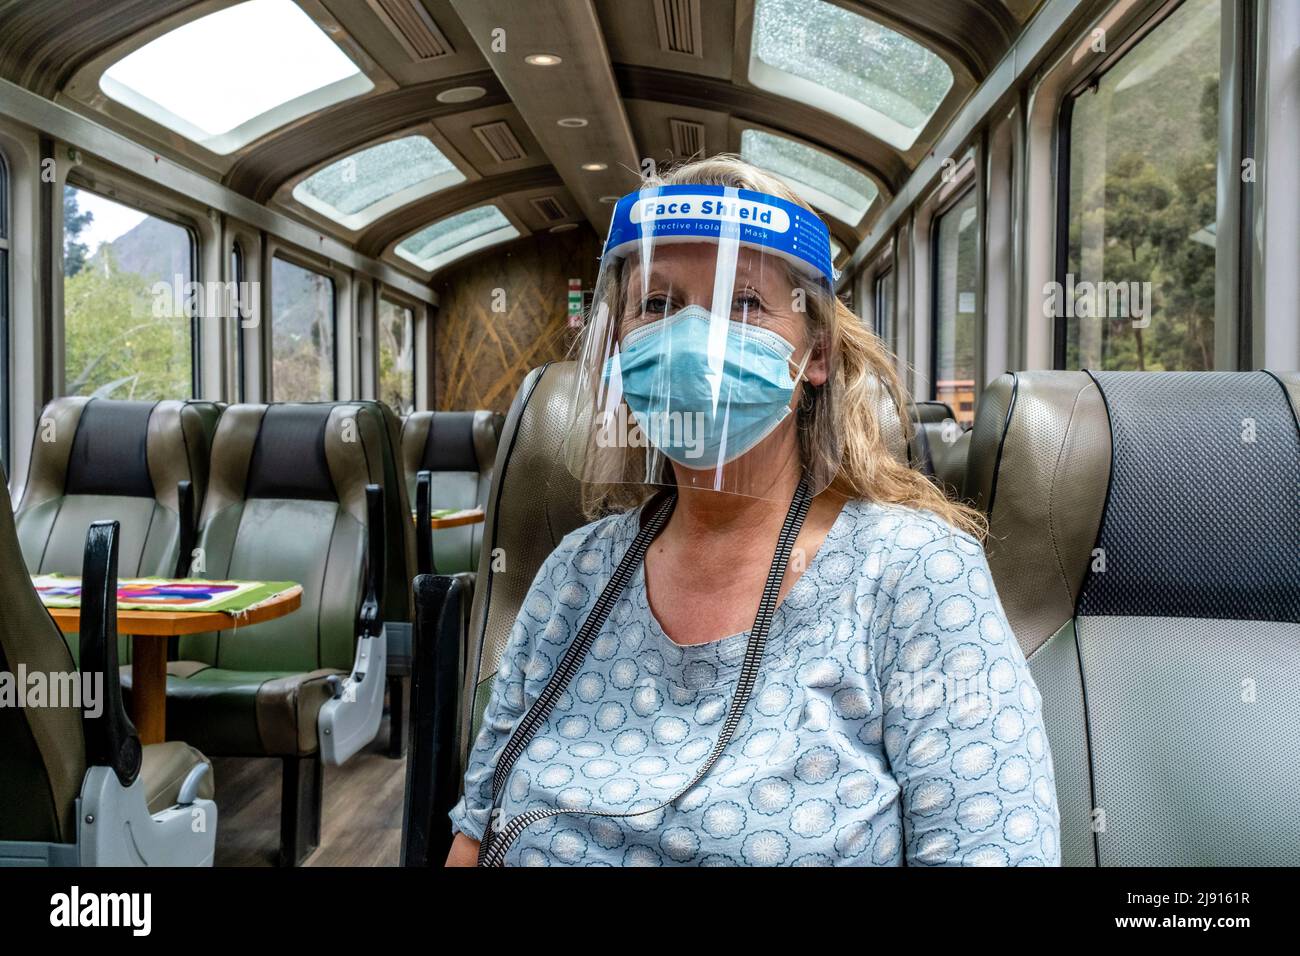 A Mature Woman On Board An Empty Perurail Train Travelling Between Ollantaytambo and Aguas Calientes Stations During The Covid 19 Pandemic, Peru. Stock Photo